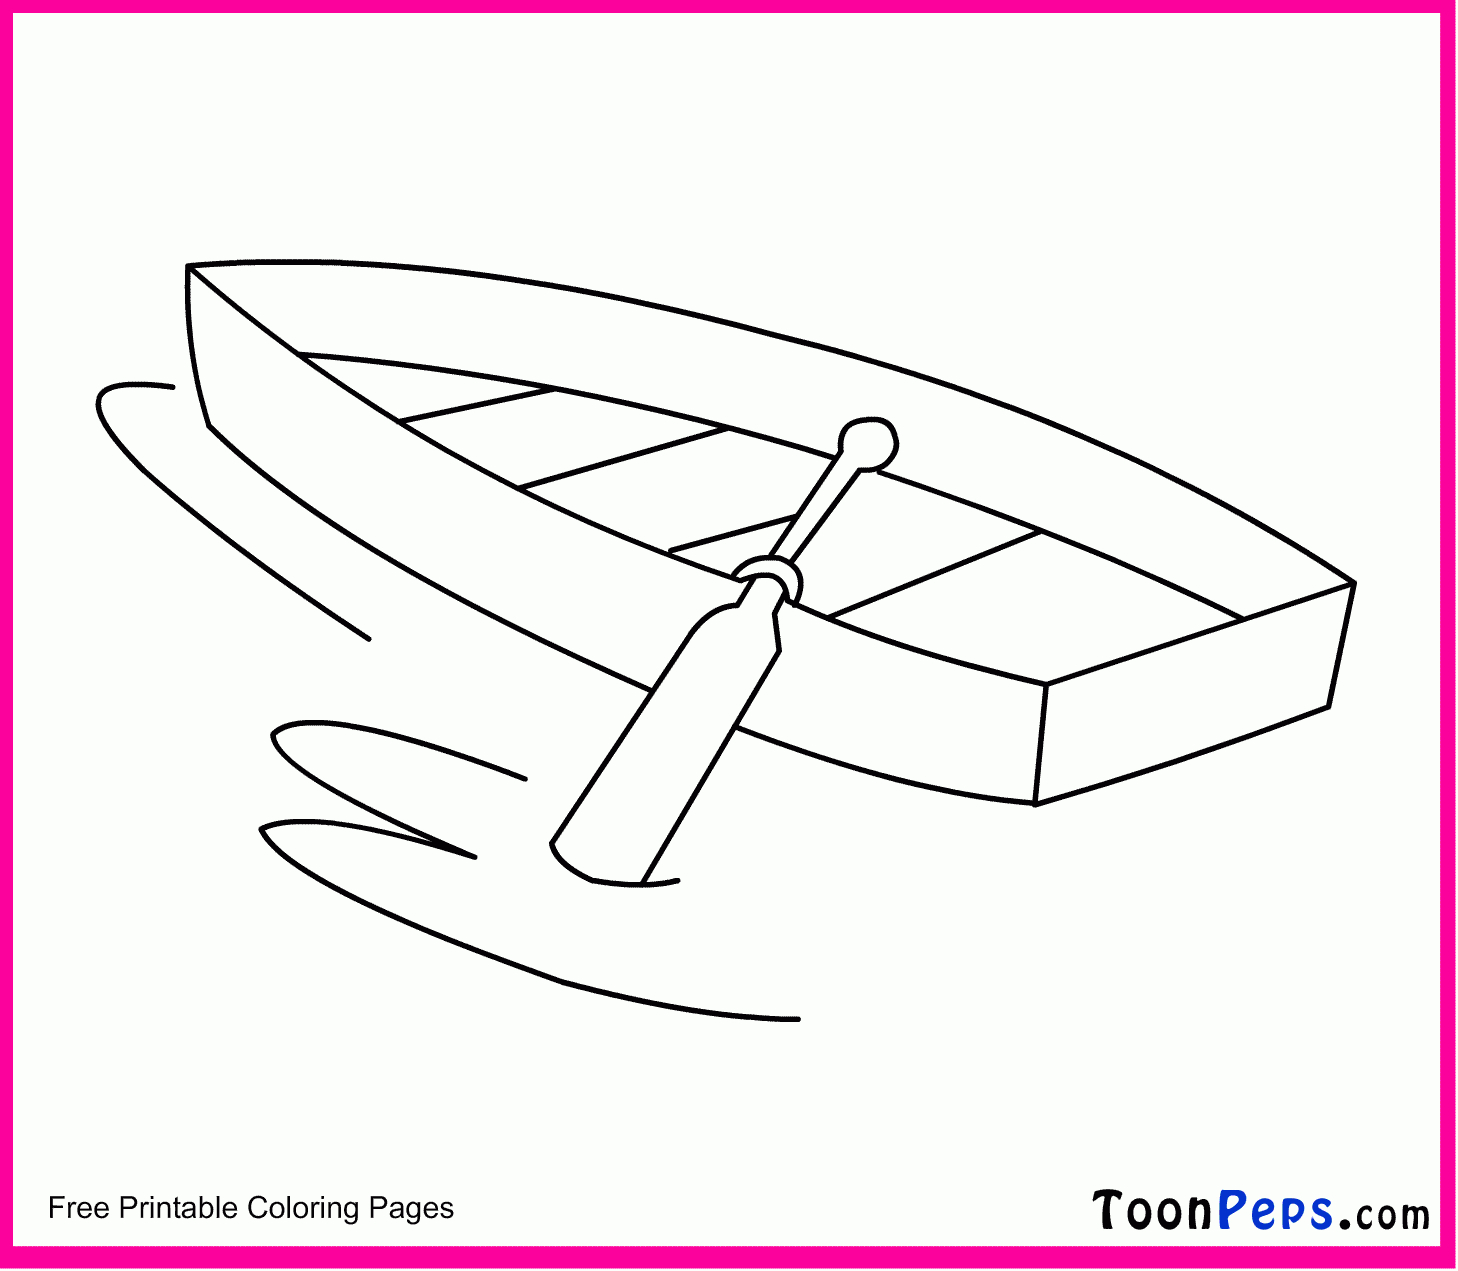 Boat Coloring Pages Free Printable - Coloring Pagescoloring Pages - Free Printable Boat Pictures